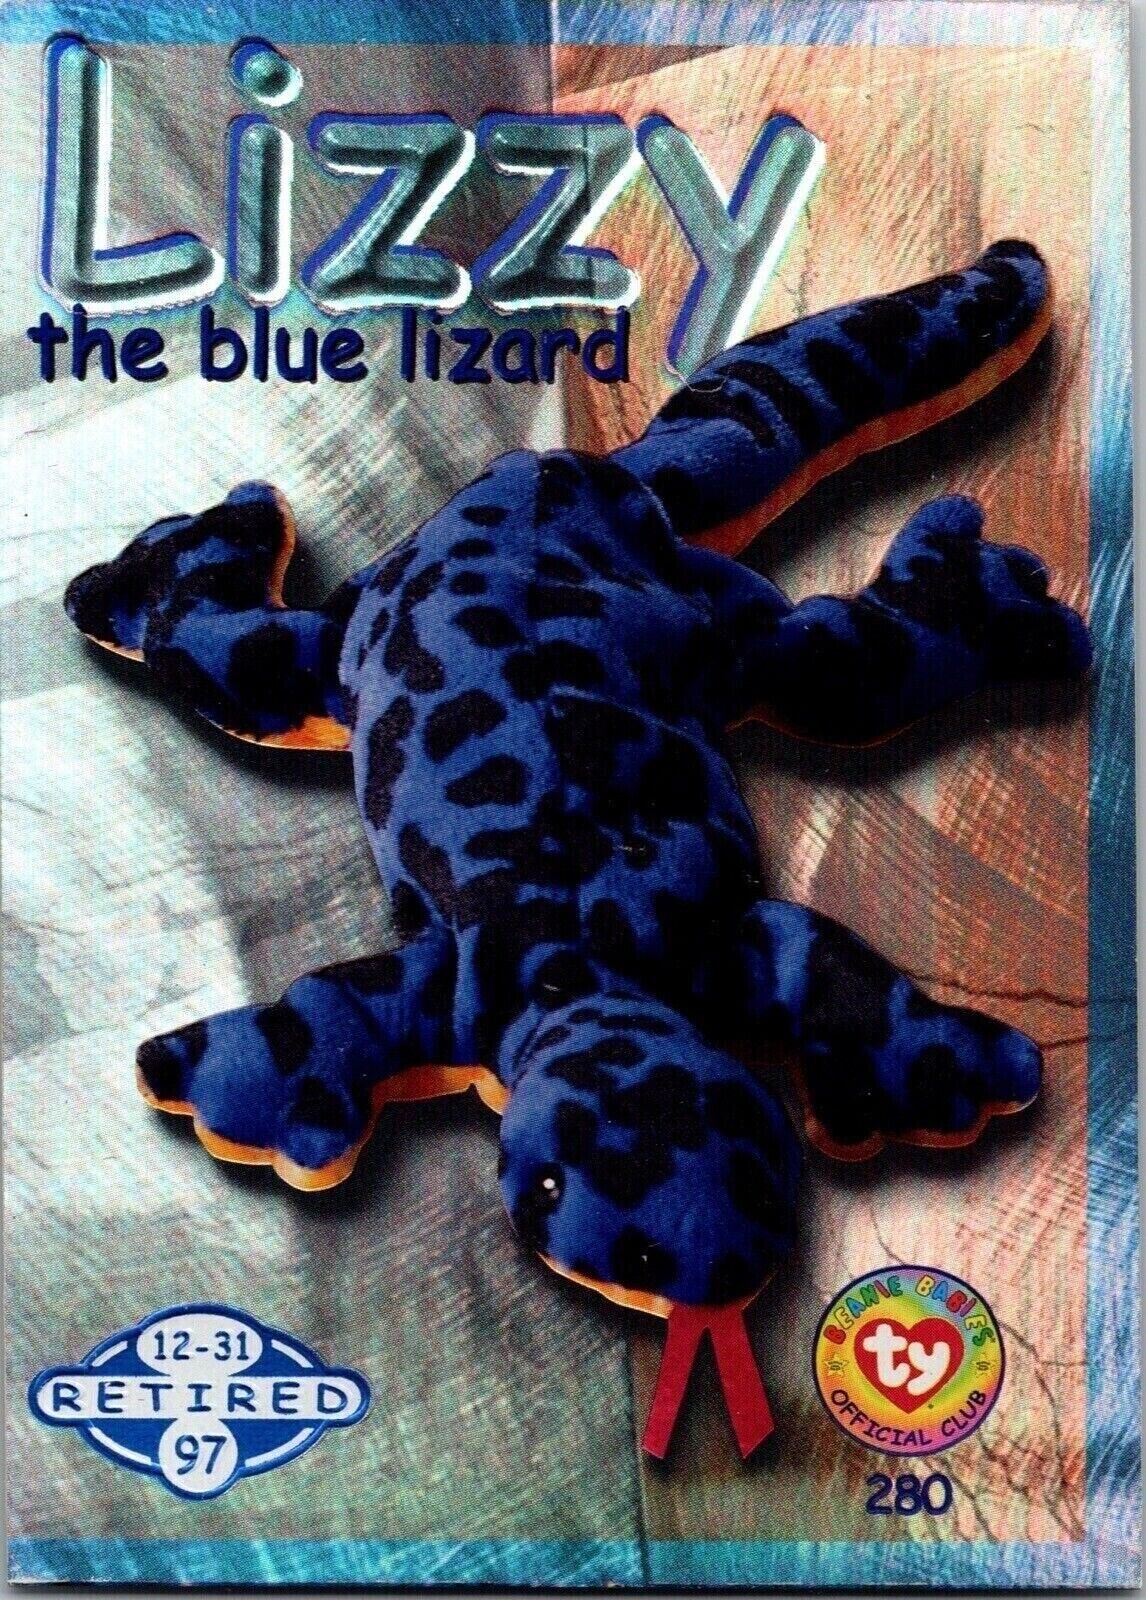 1999 Luzzy (blue) 280 Series 2 Retired TY Beanie Baby Trading Card 